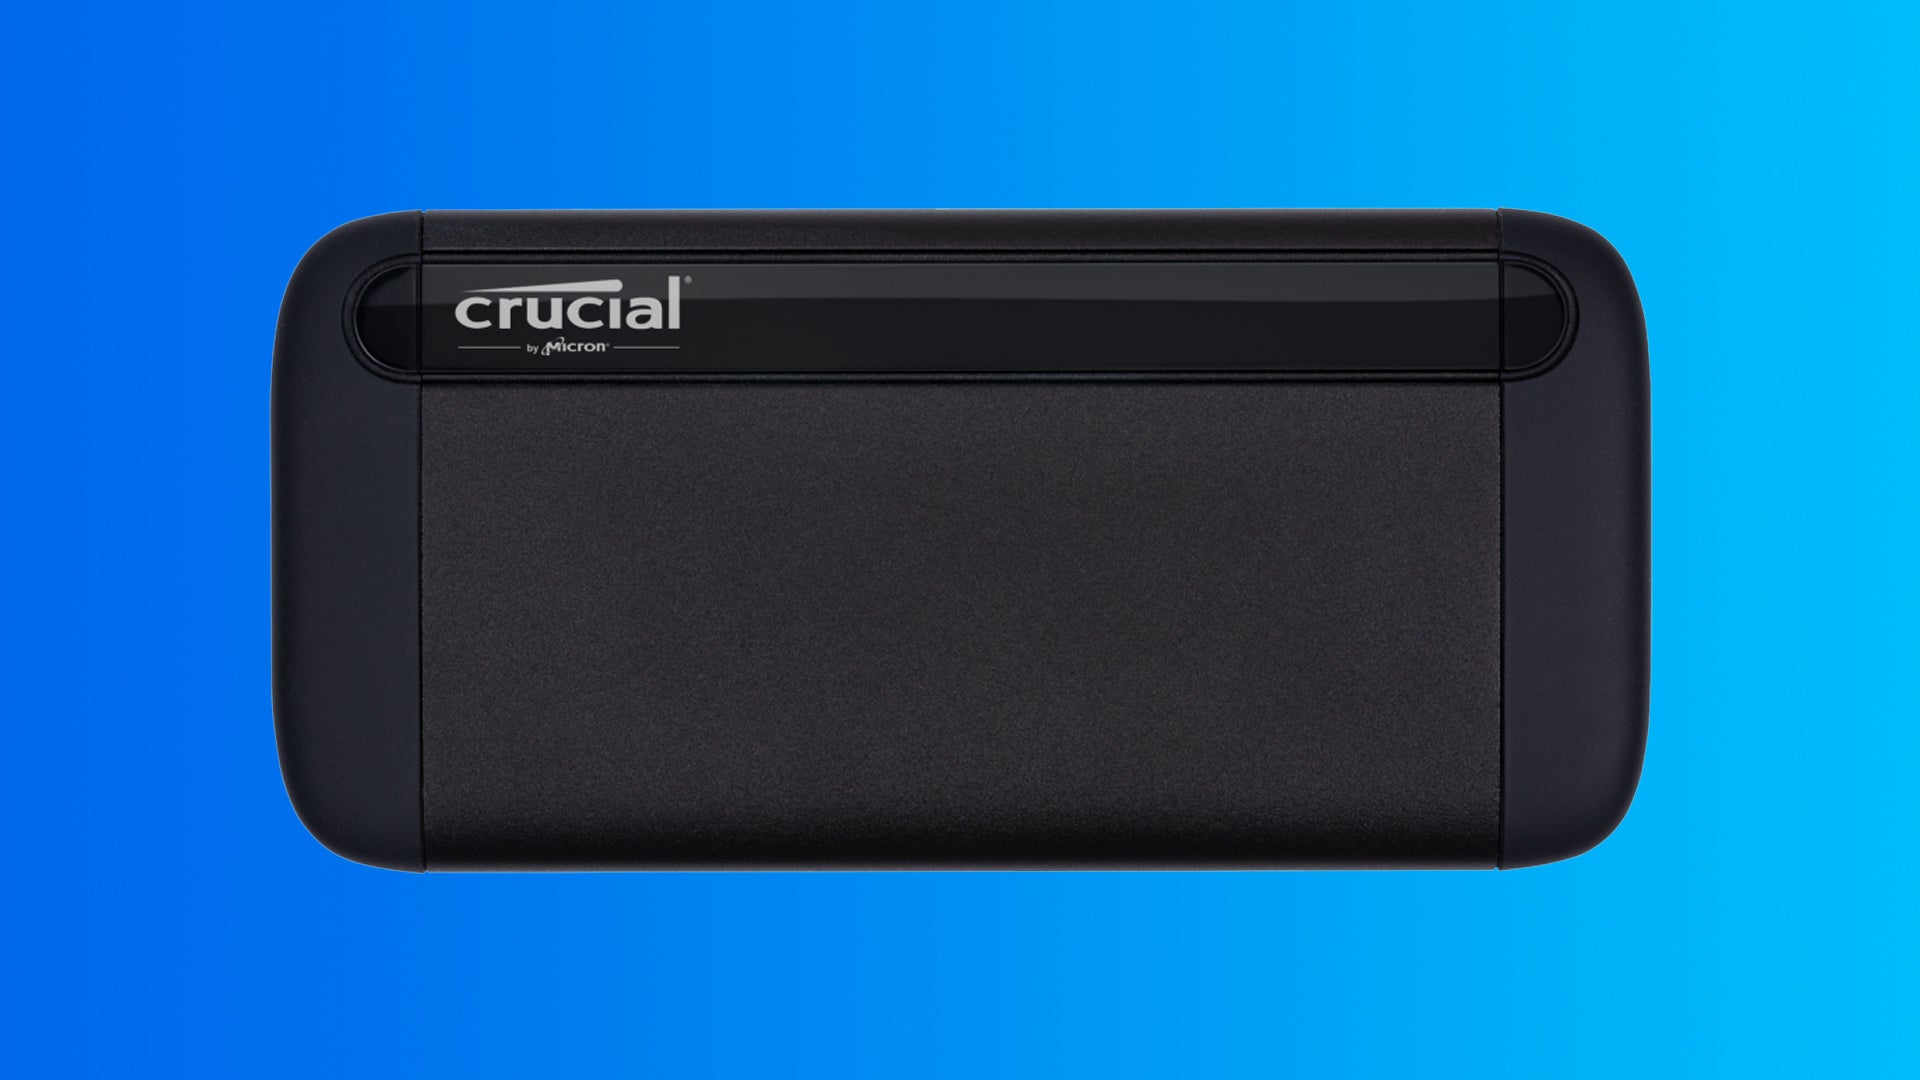 Image for Grab the excellent Crucial X8 portable 2TB SSD for £121 at Amazon